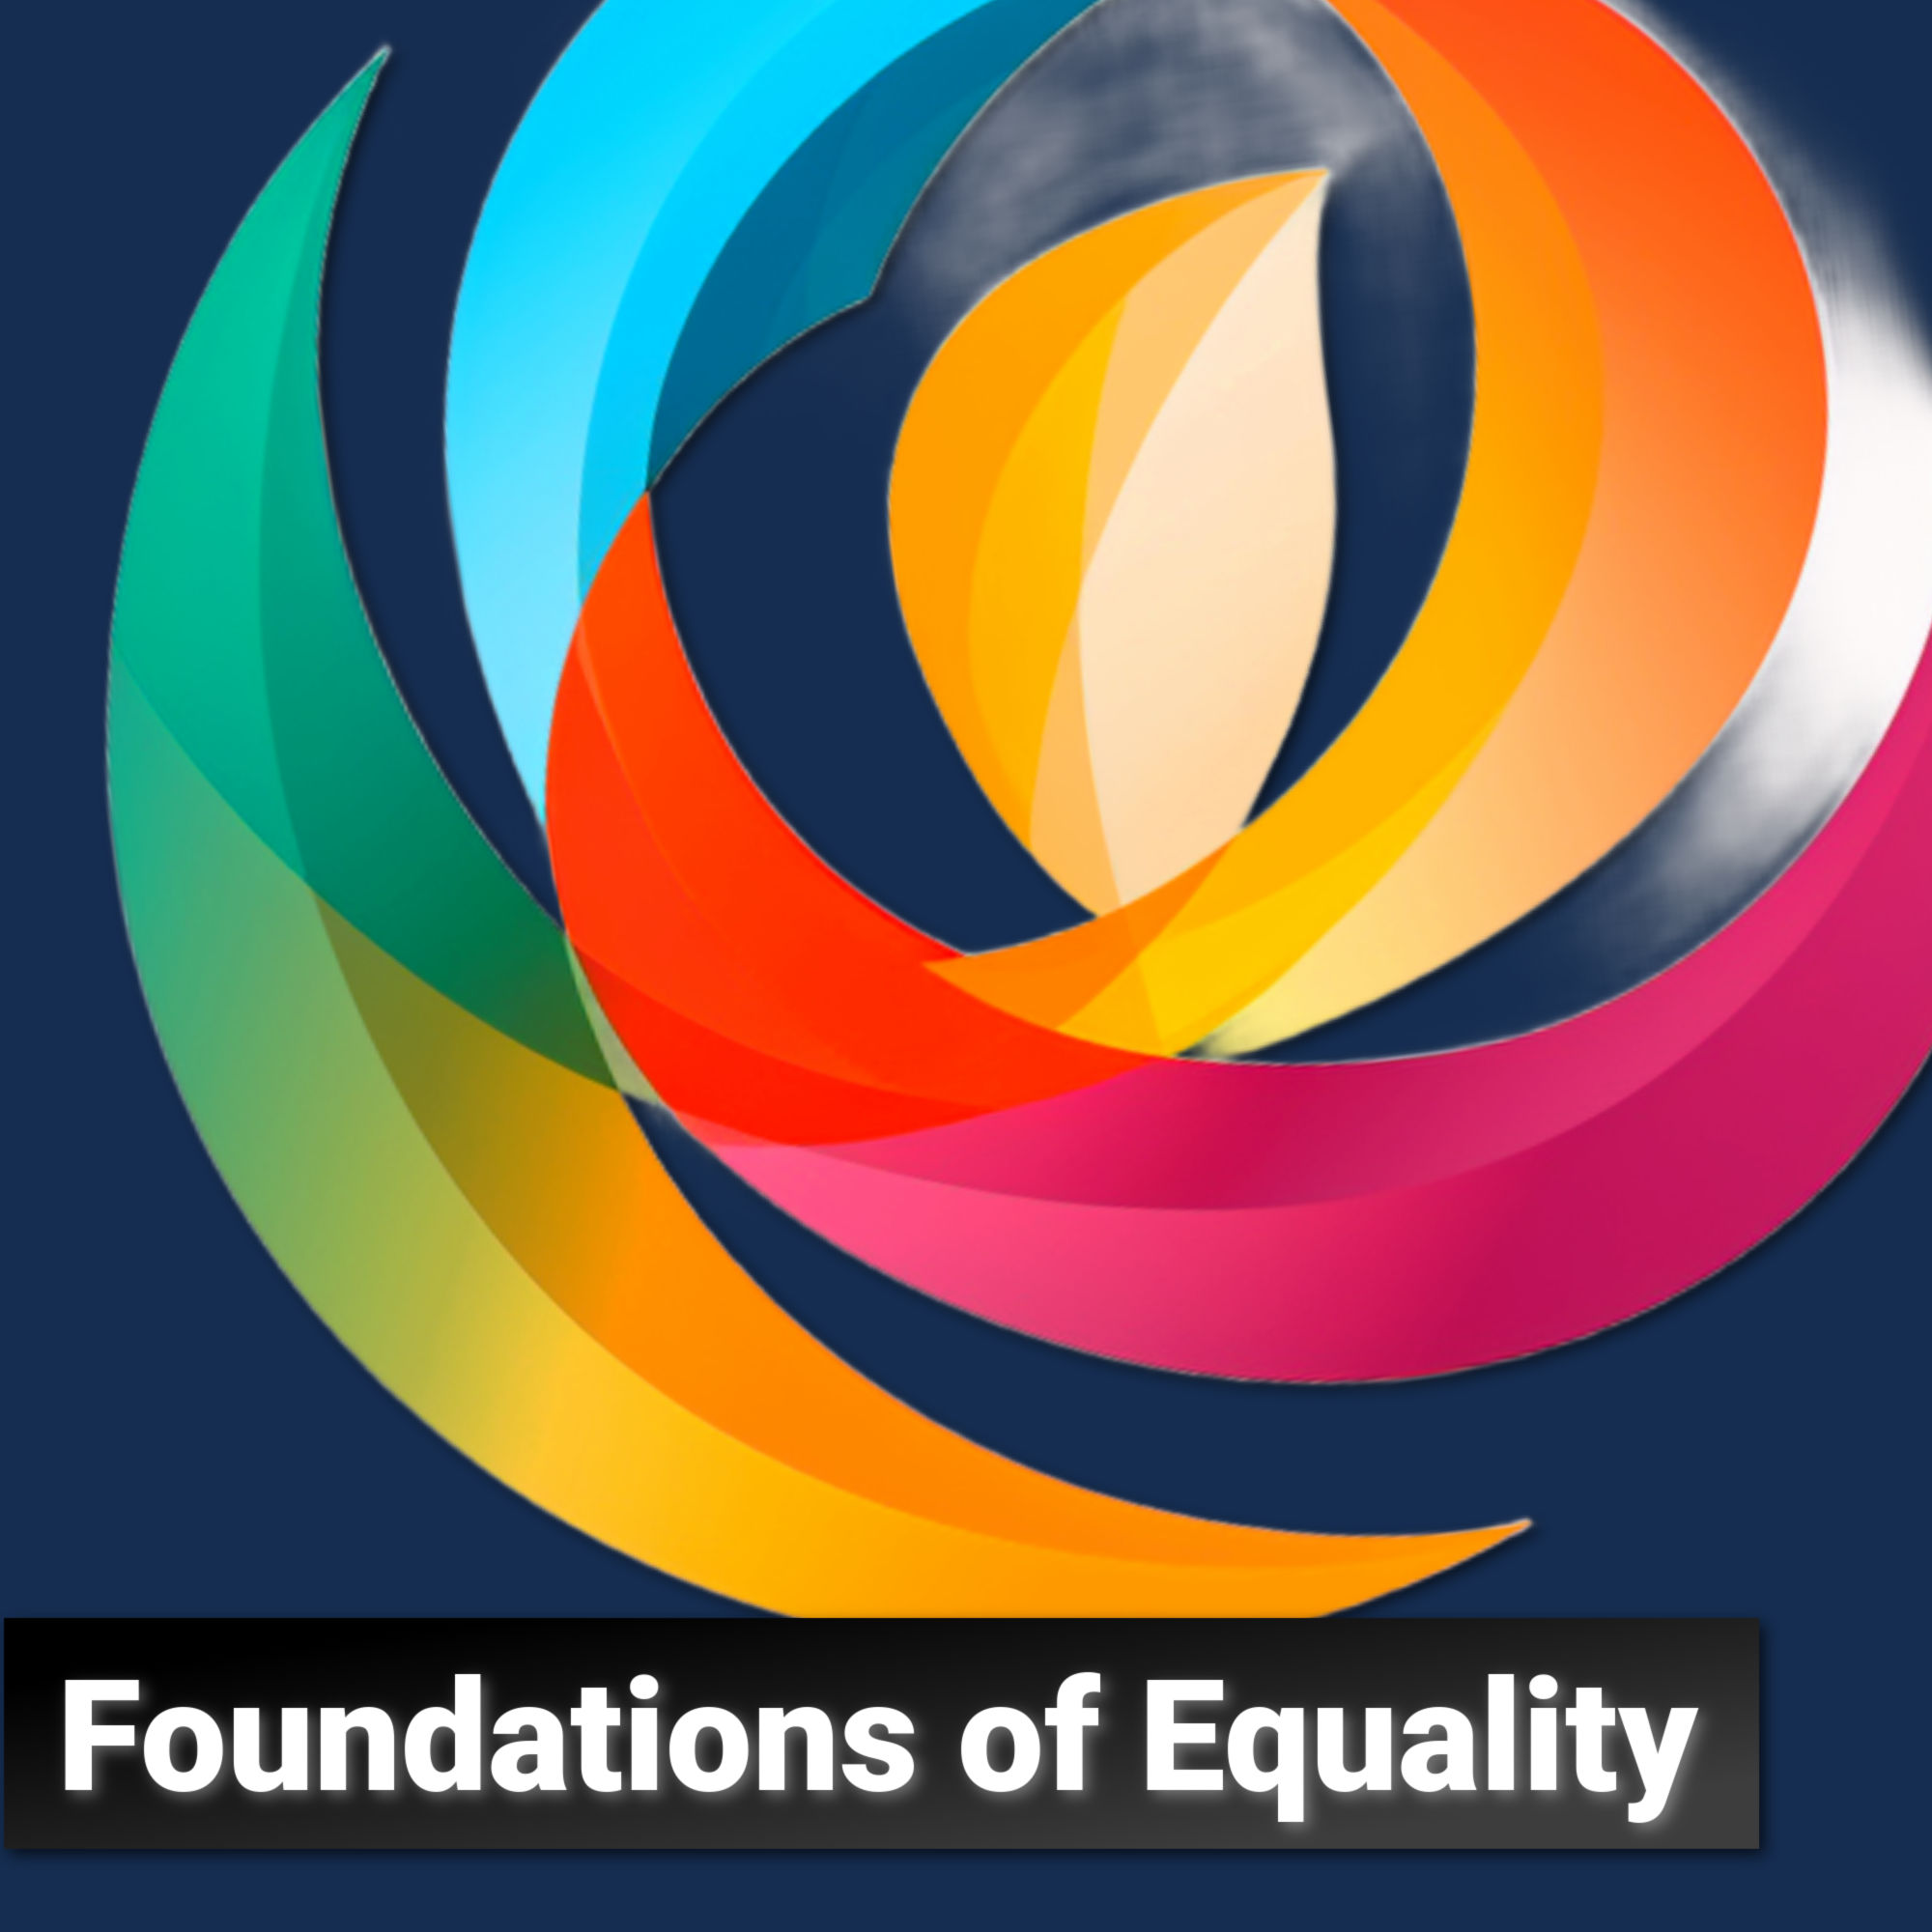 Foundations of Equality programme logo